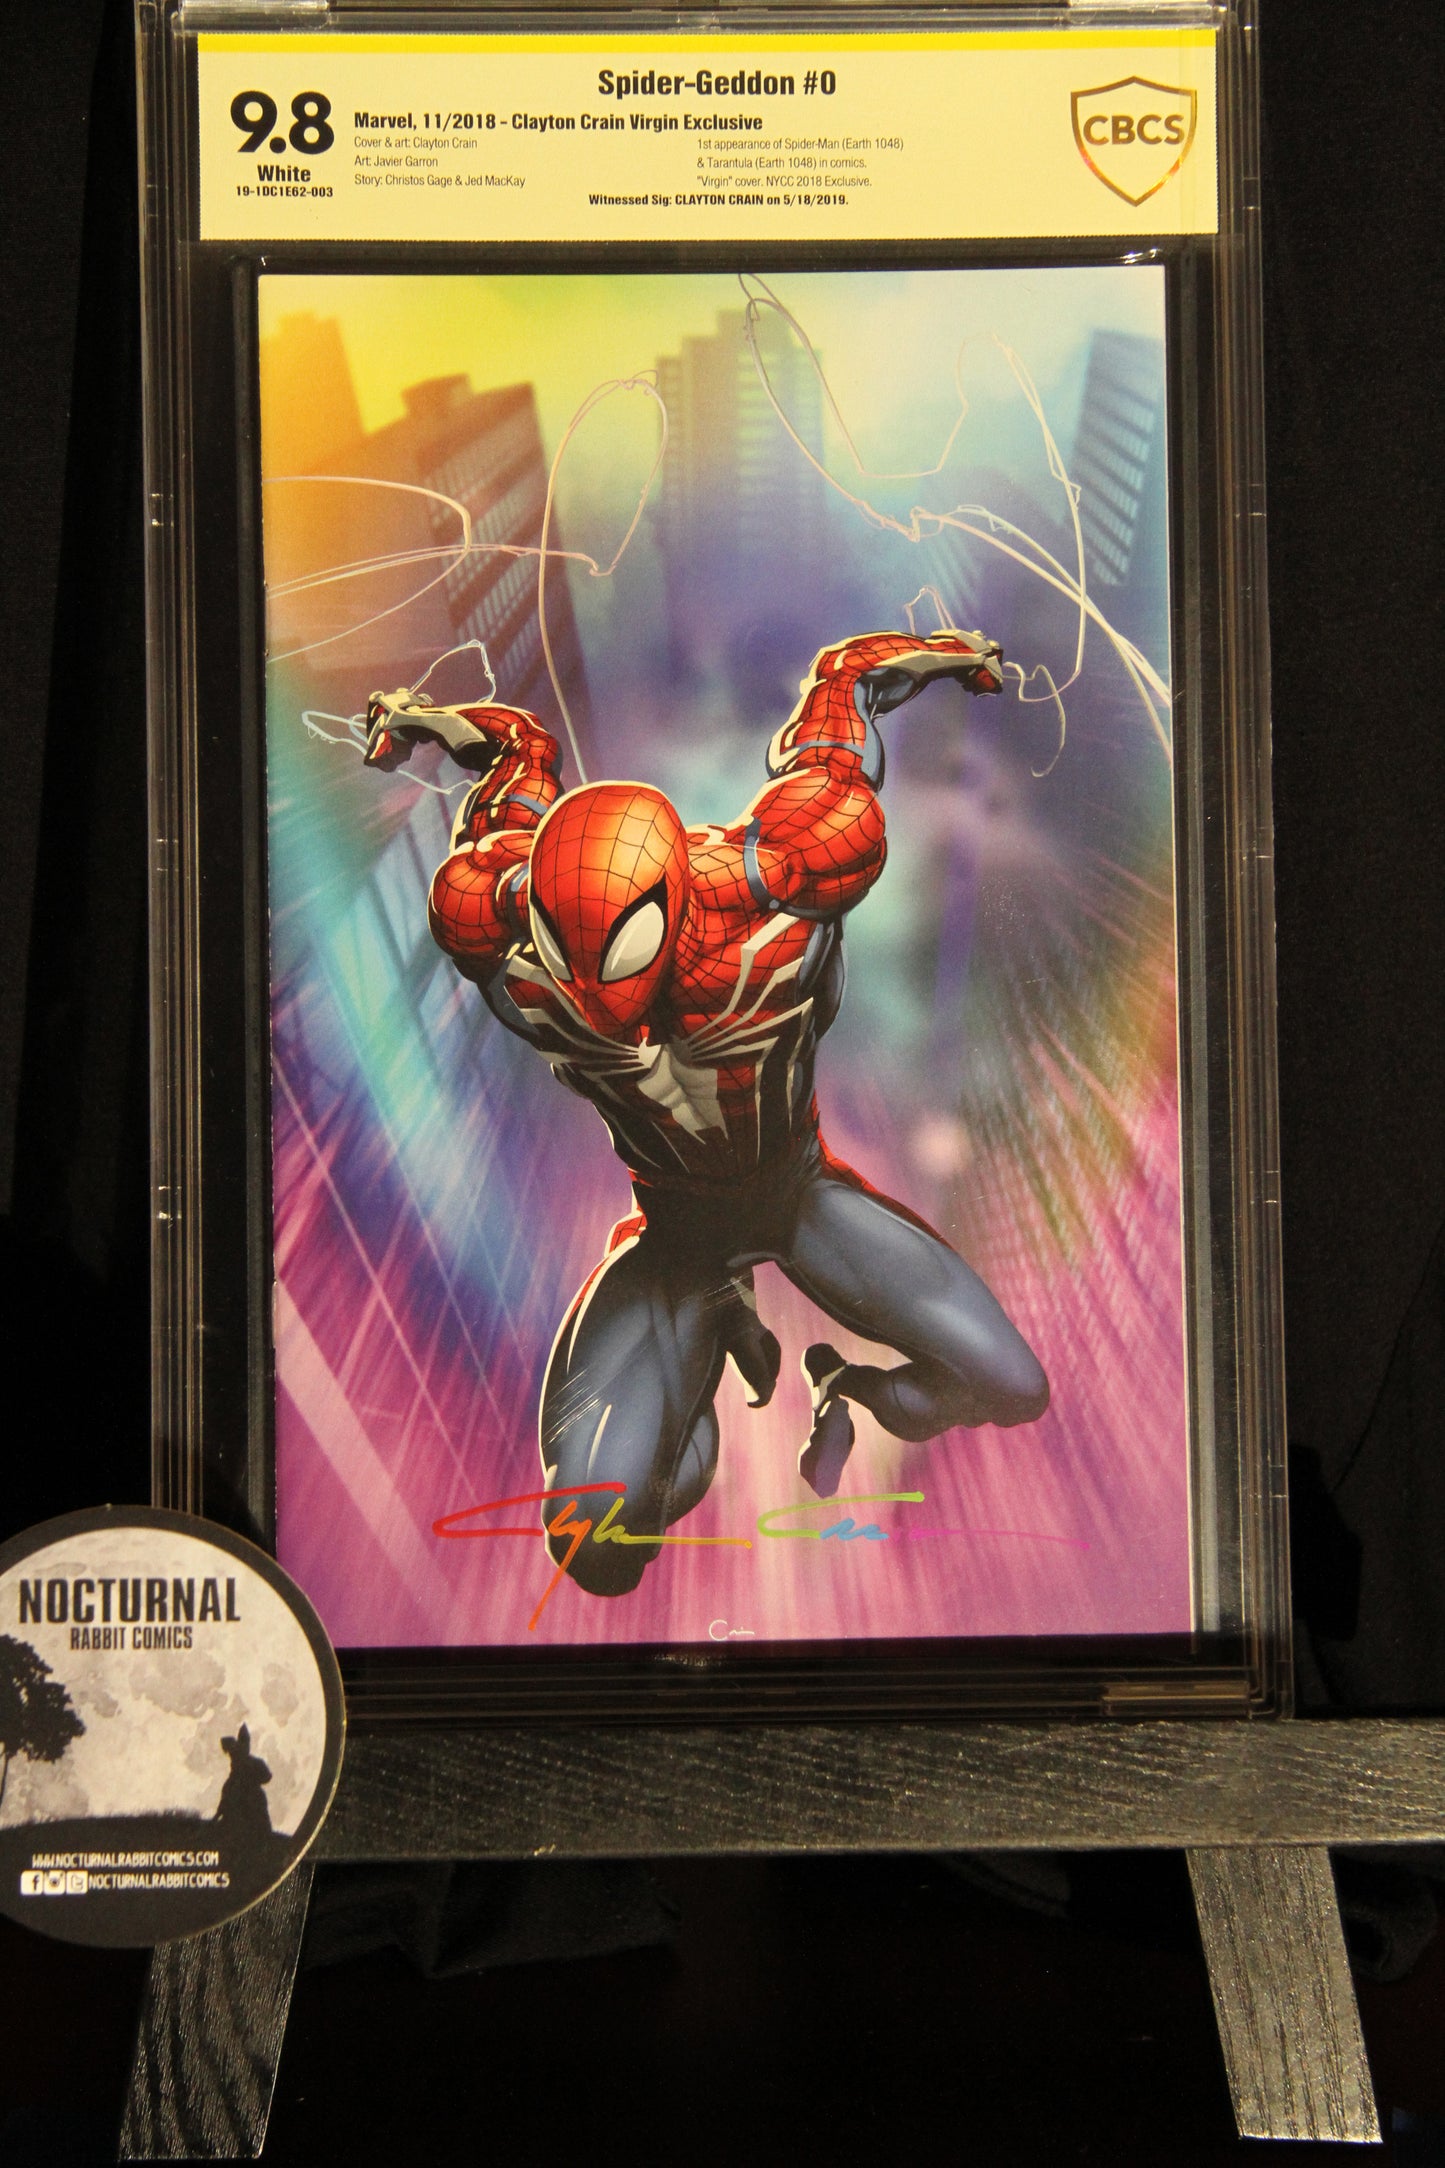 Spider-Geddon #0 NYCC 9.8 CBCS Signed by Clayton Crain